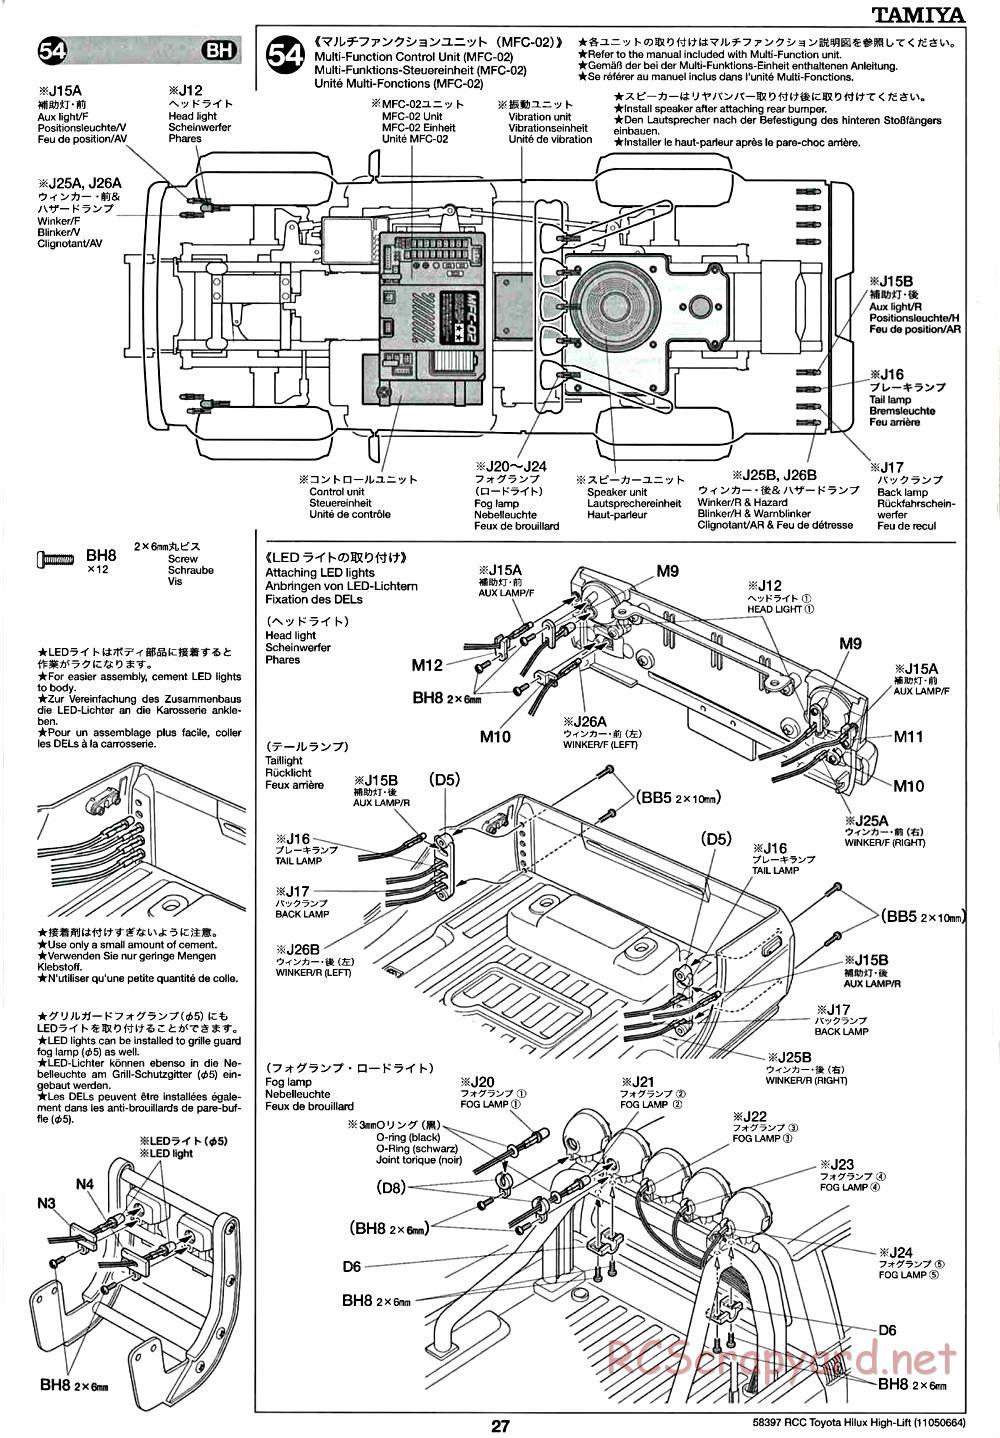 Tamiya - Toyota Hilux High-Lift Chassis - Manual - Page 27